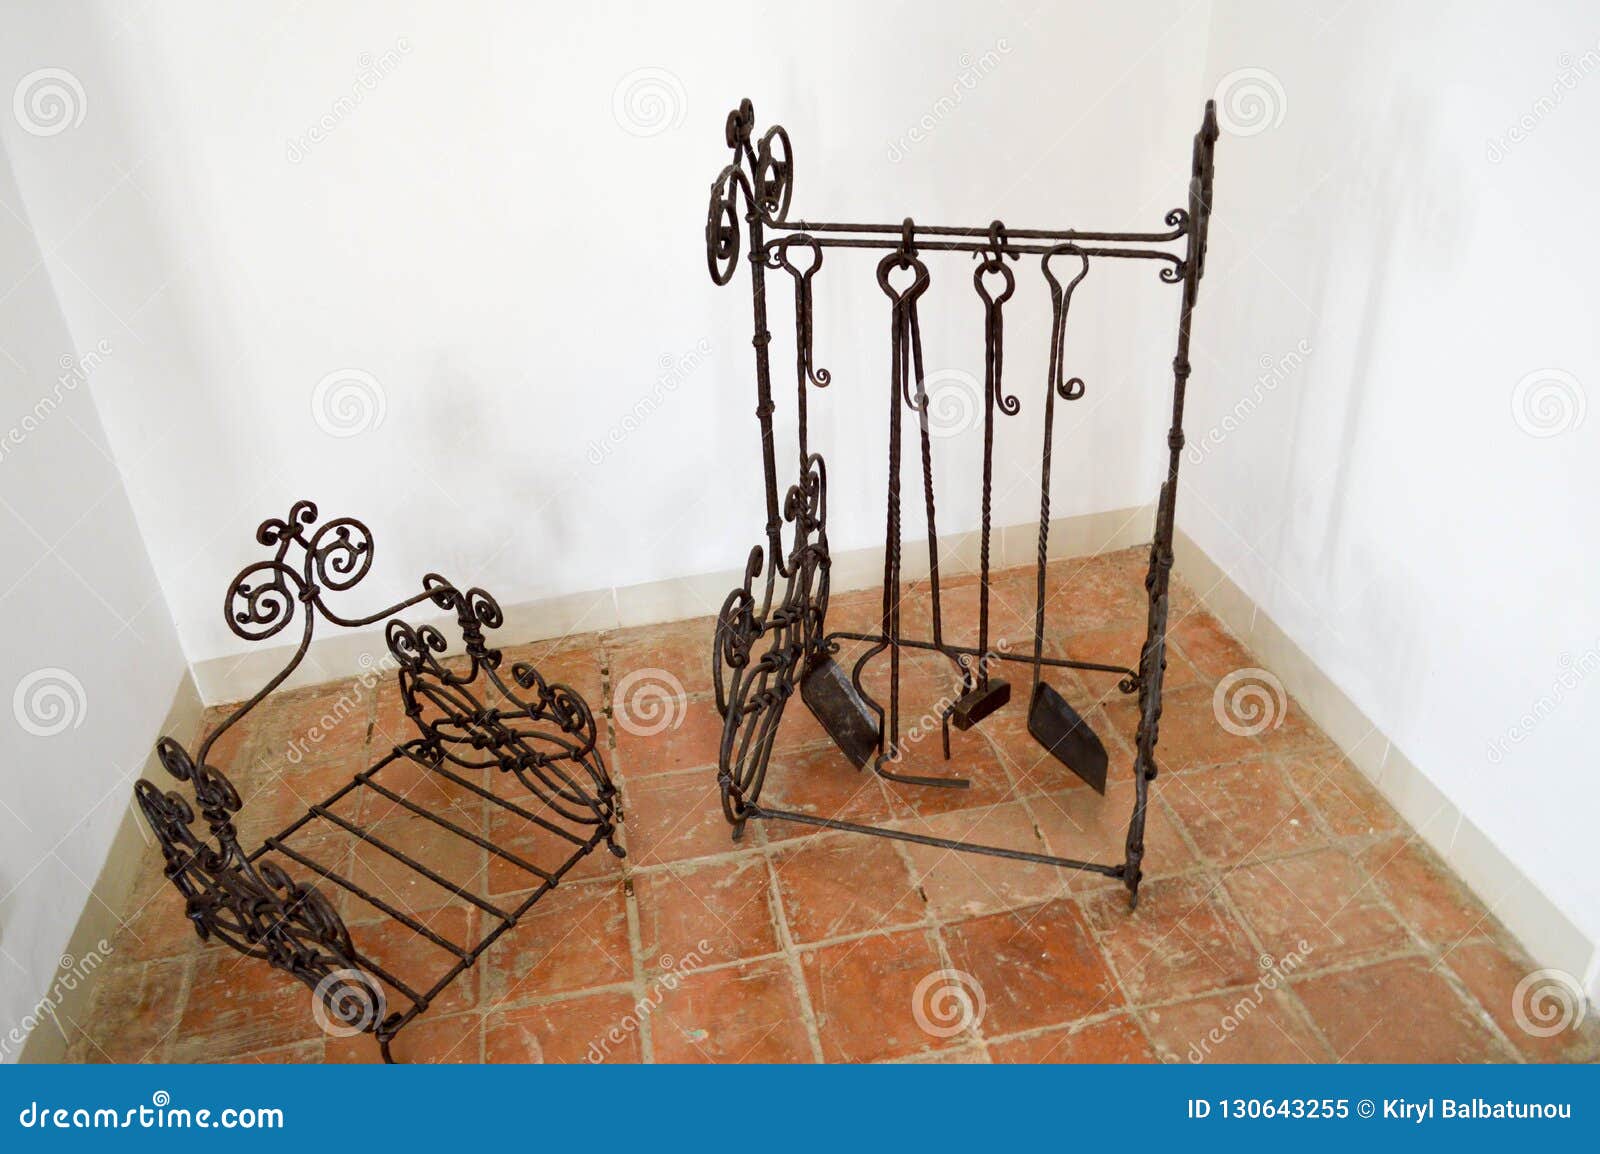 Iron Black Metal Wrought Iron Accessories For The Fireplace Poker